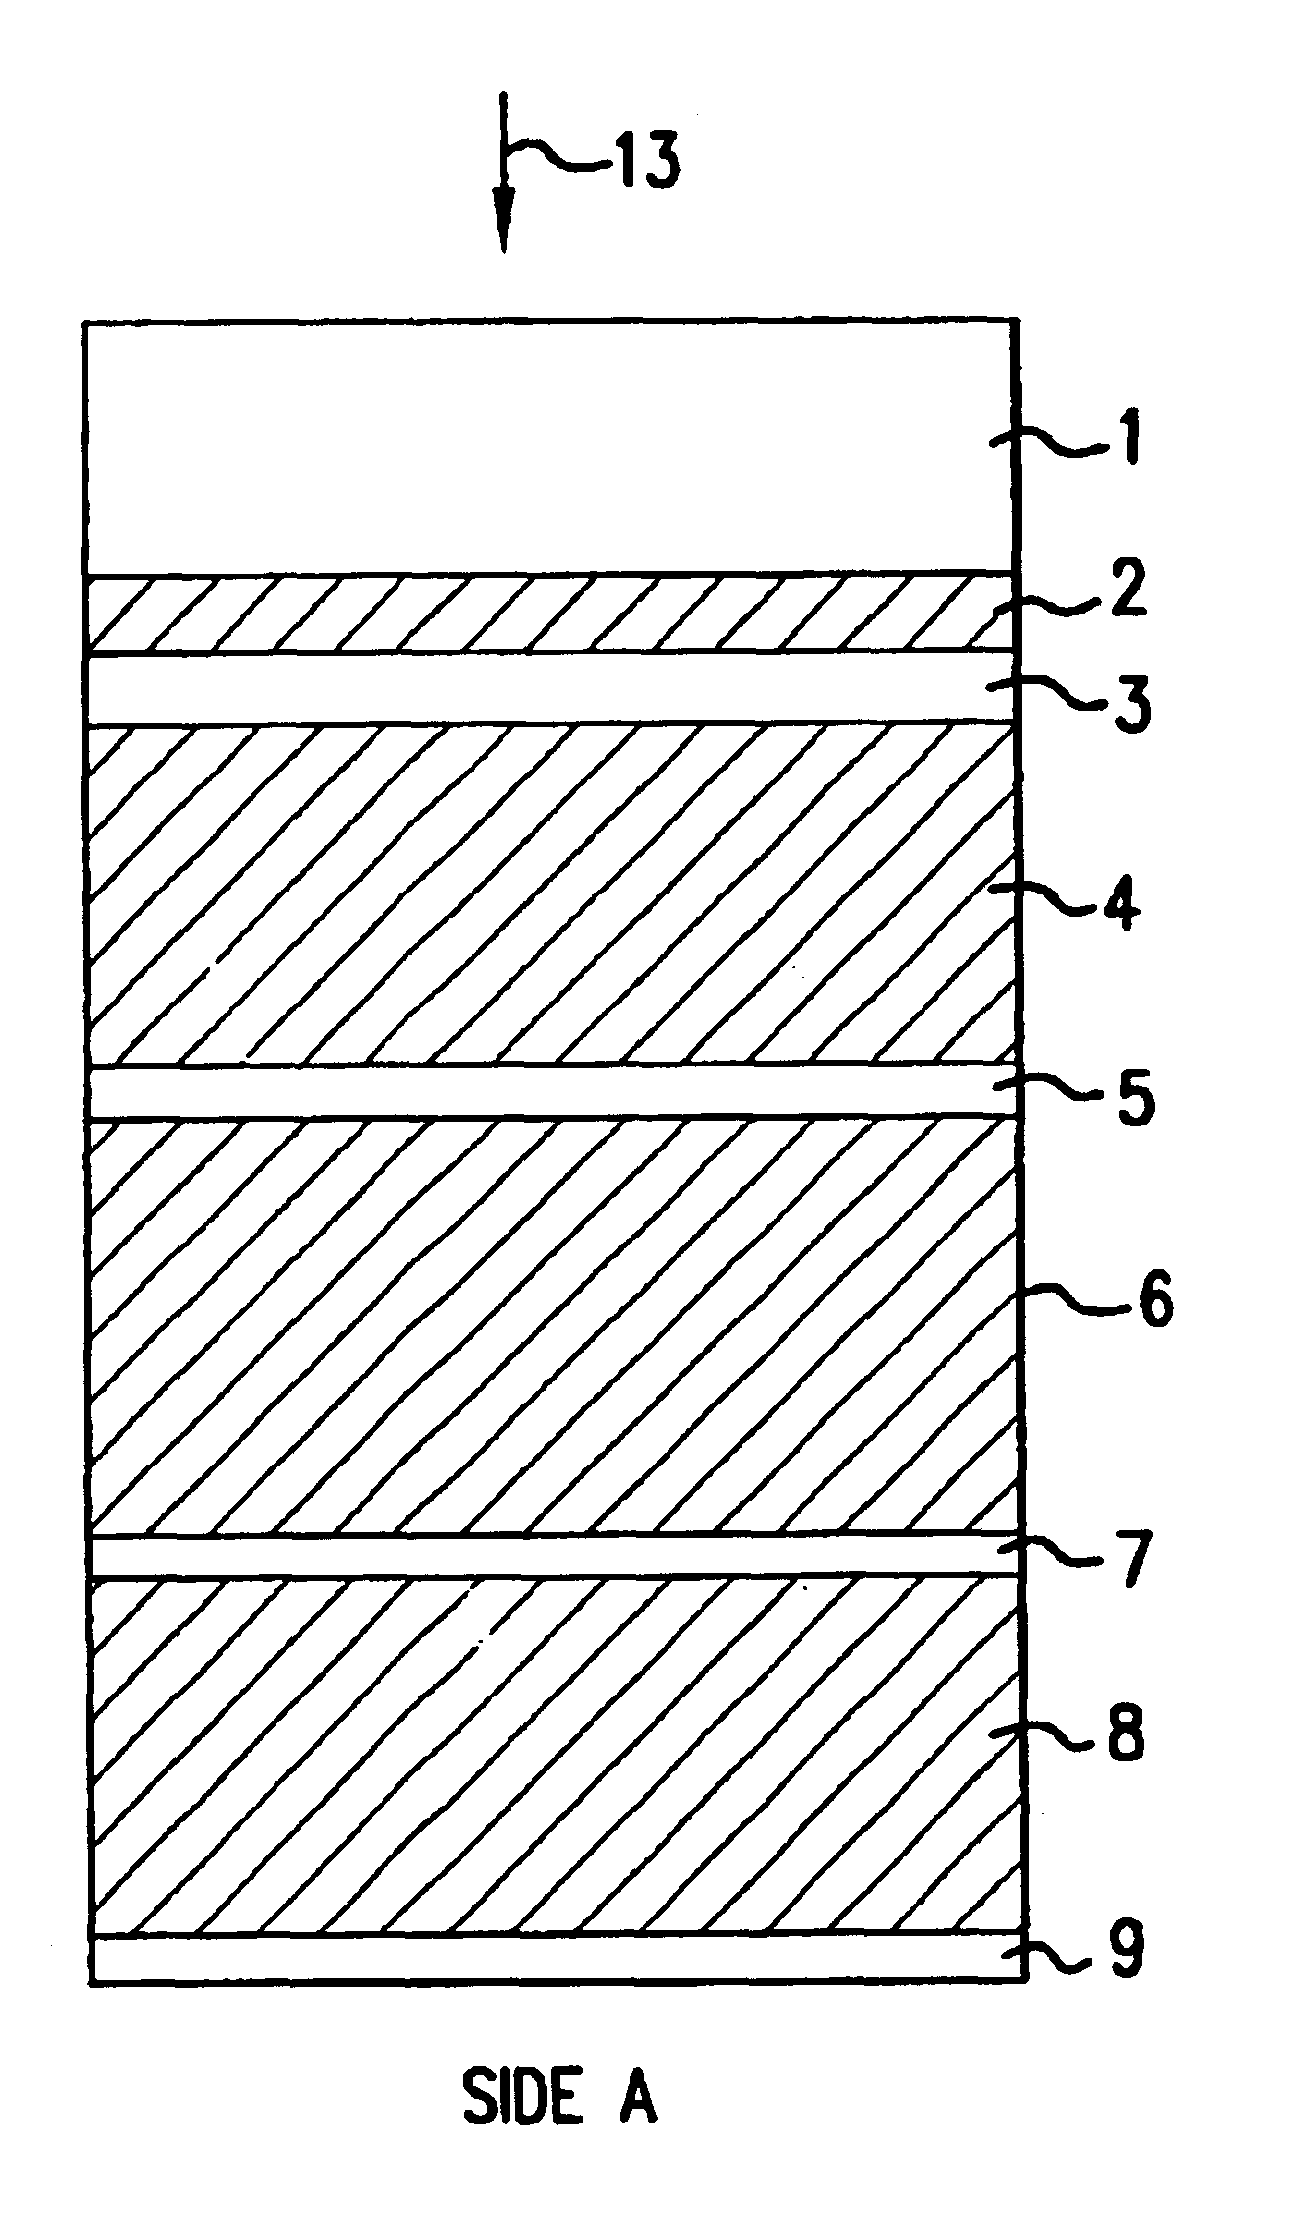 Catalytic combustor for a gas turbine